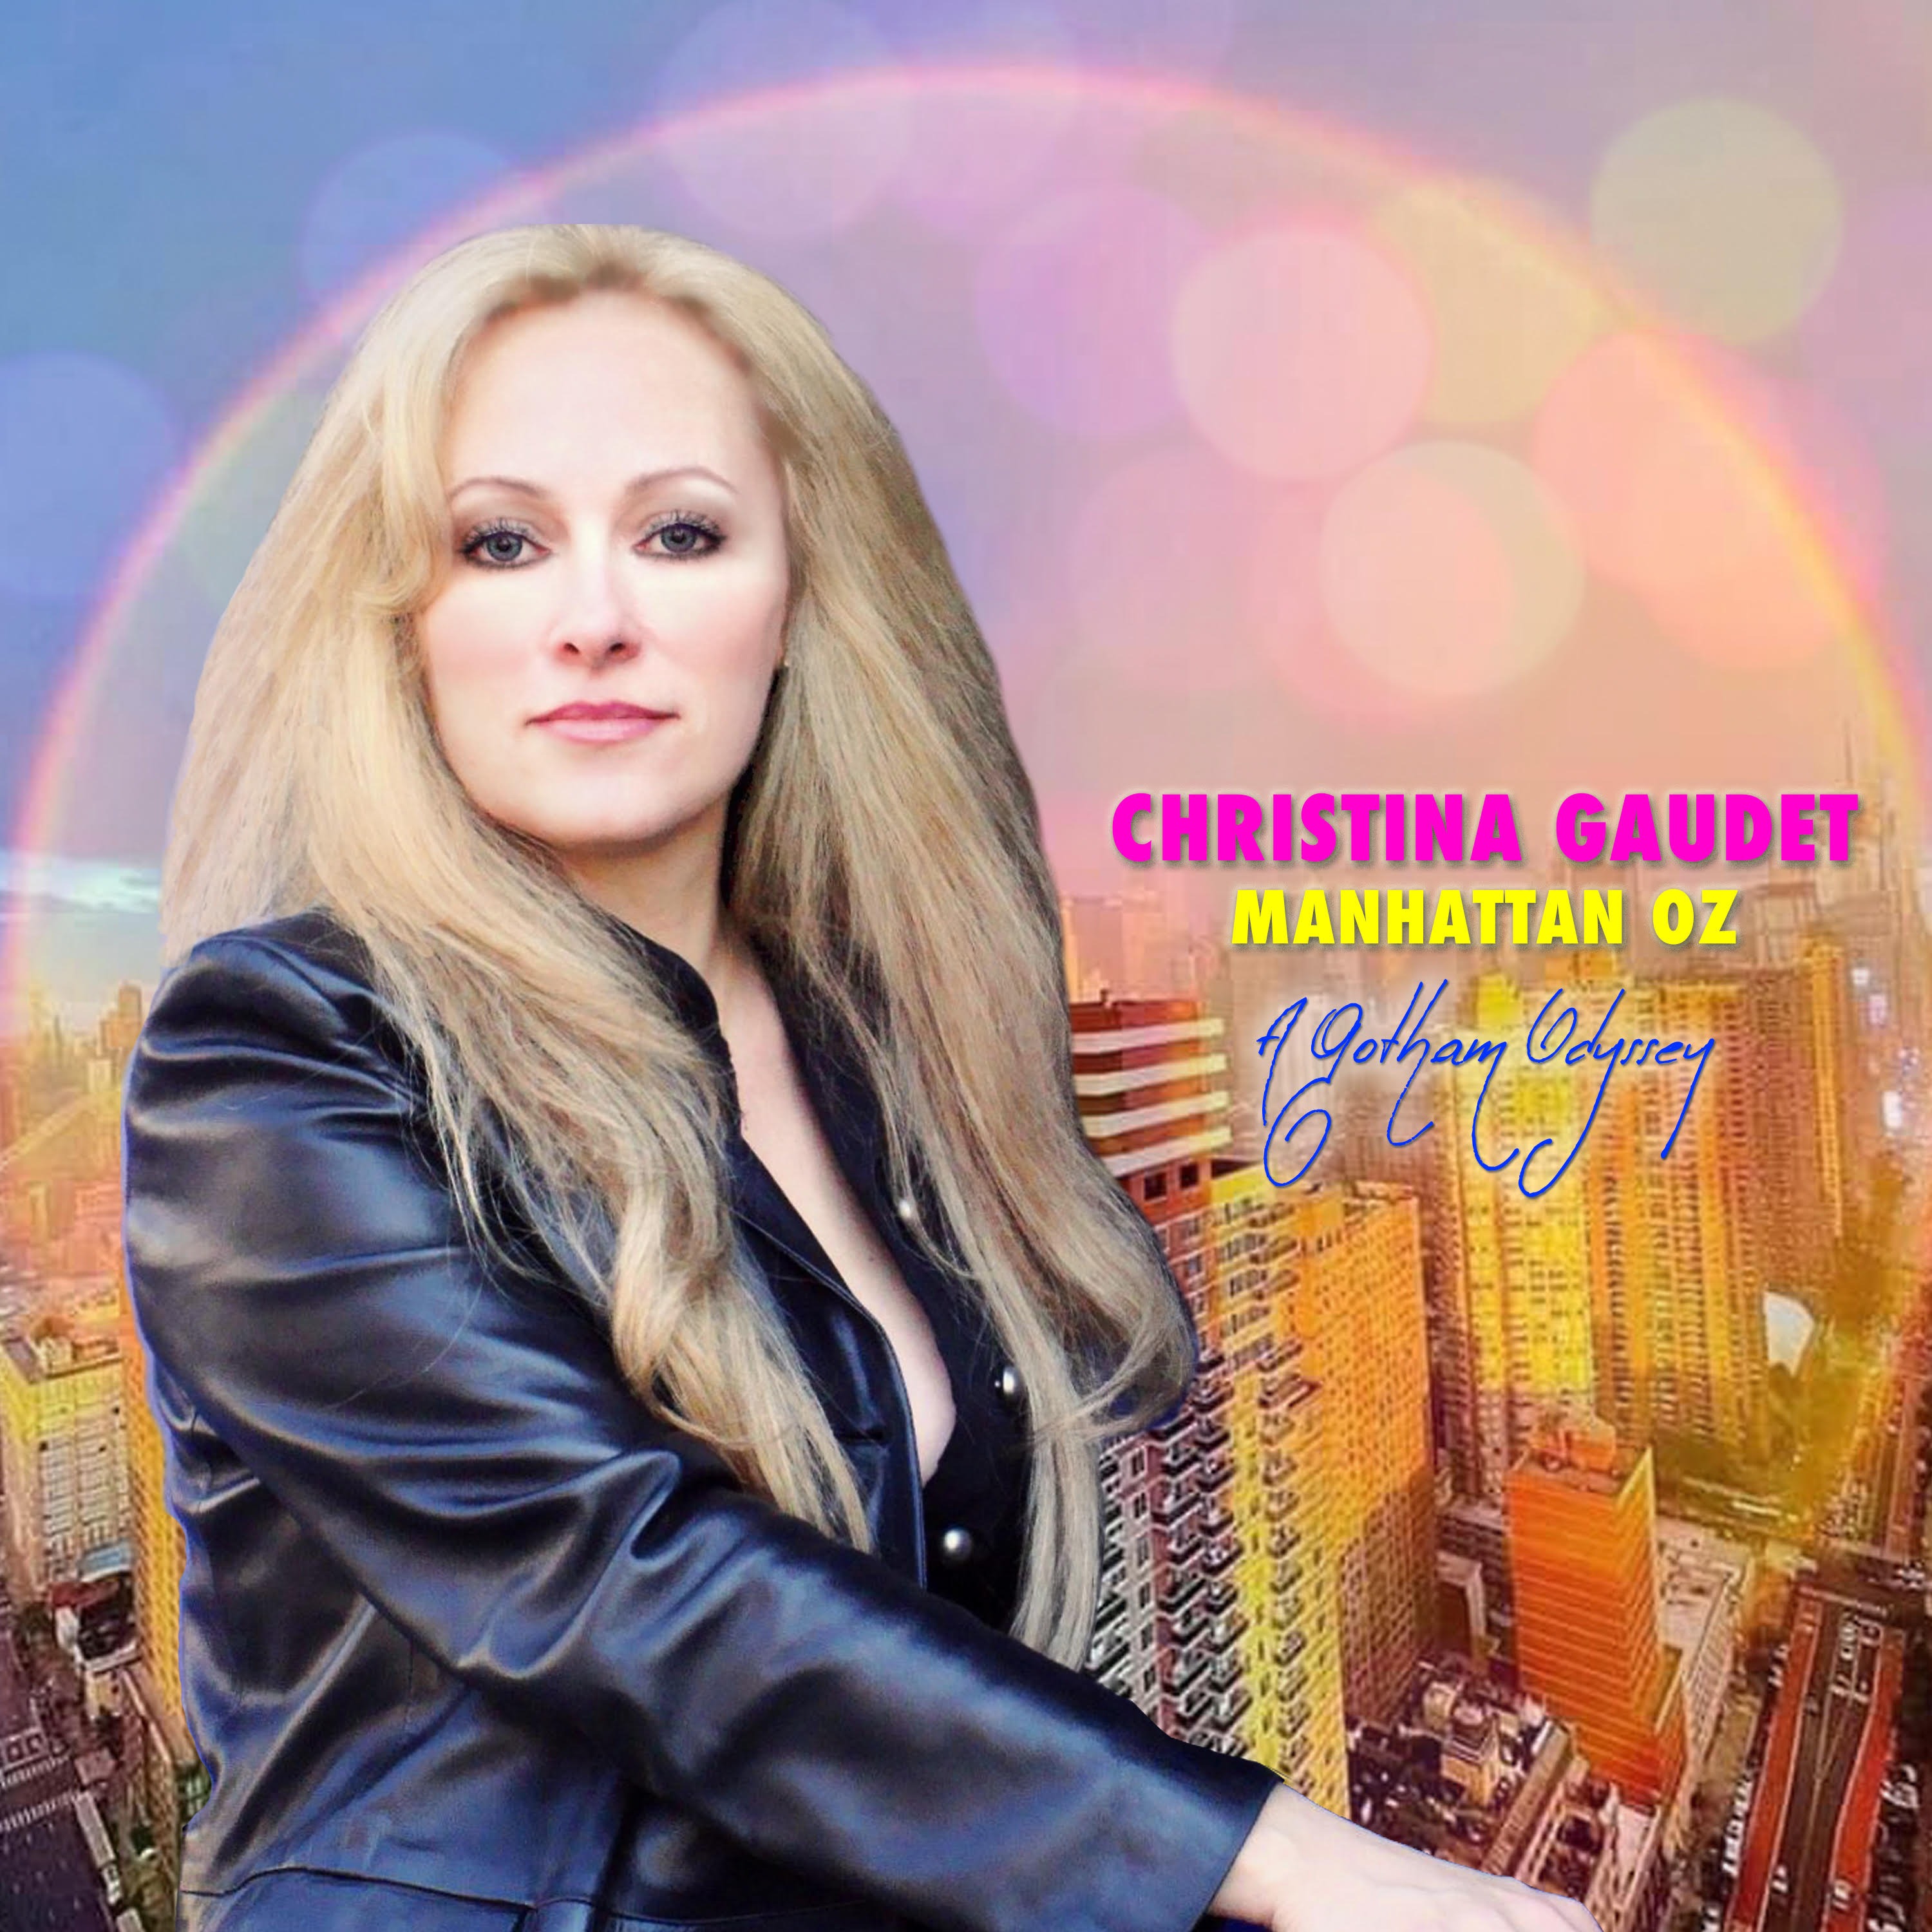 Music That Envisions A Hopeful Future: Christina Gaudet Releases A Fresh New Album, ‘Manhattan OZ’, That Speaks Of The Need to Rebuild and Reimagine.